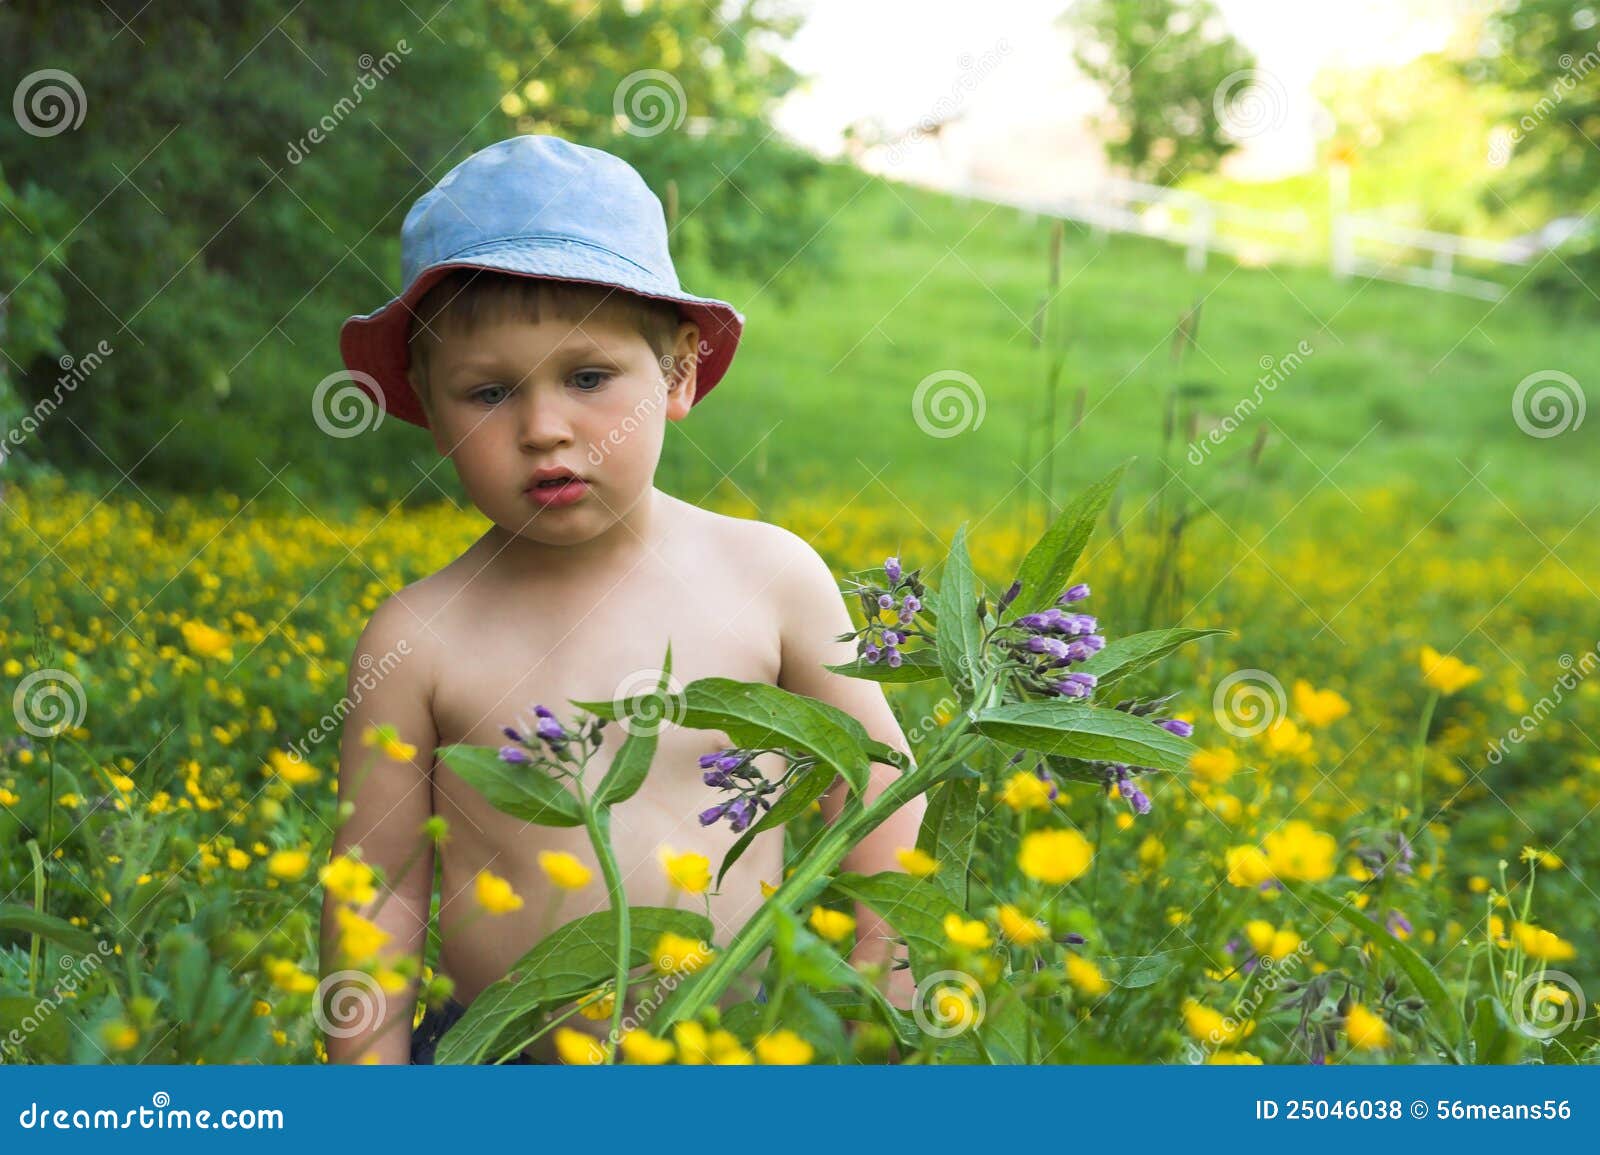 Boy playing on the meadow stock photo. Image of rest - 25046038